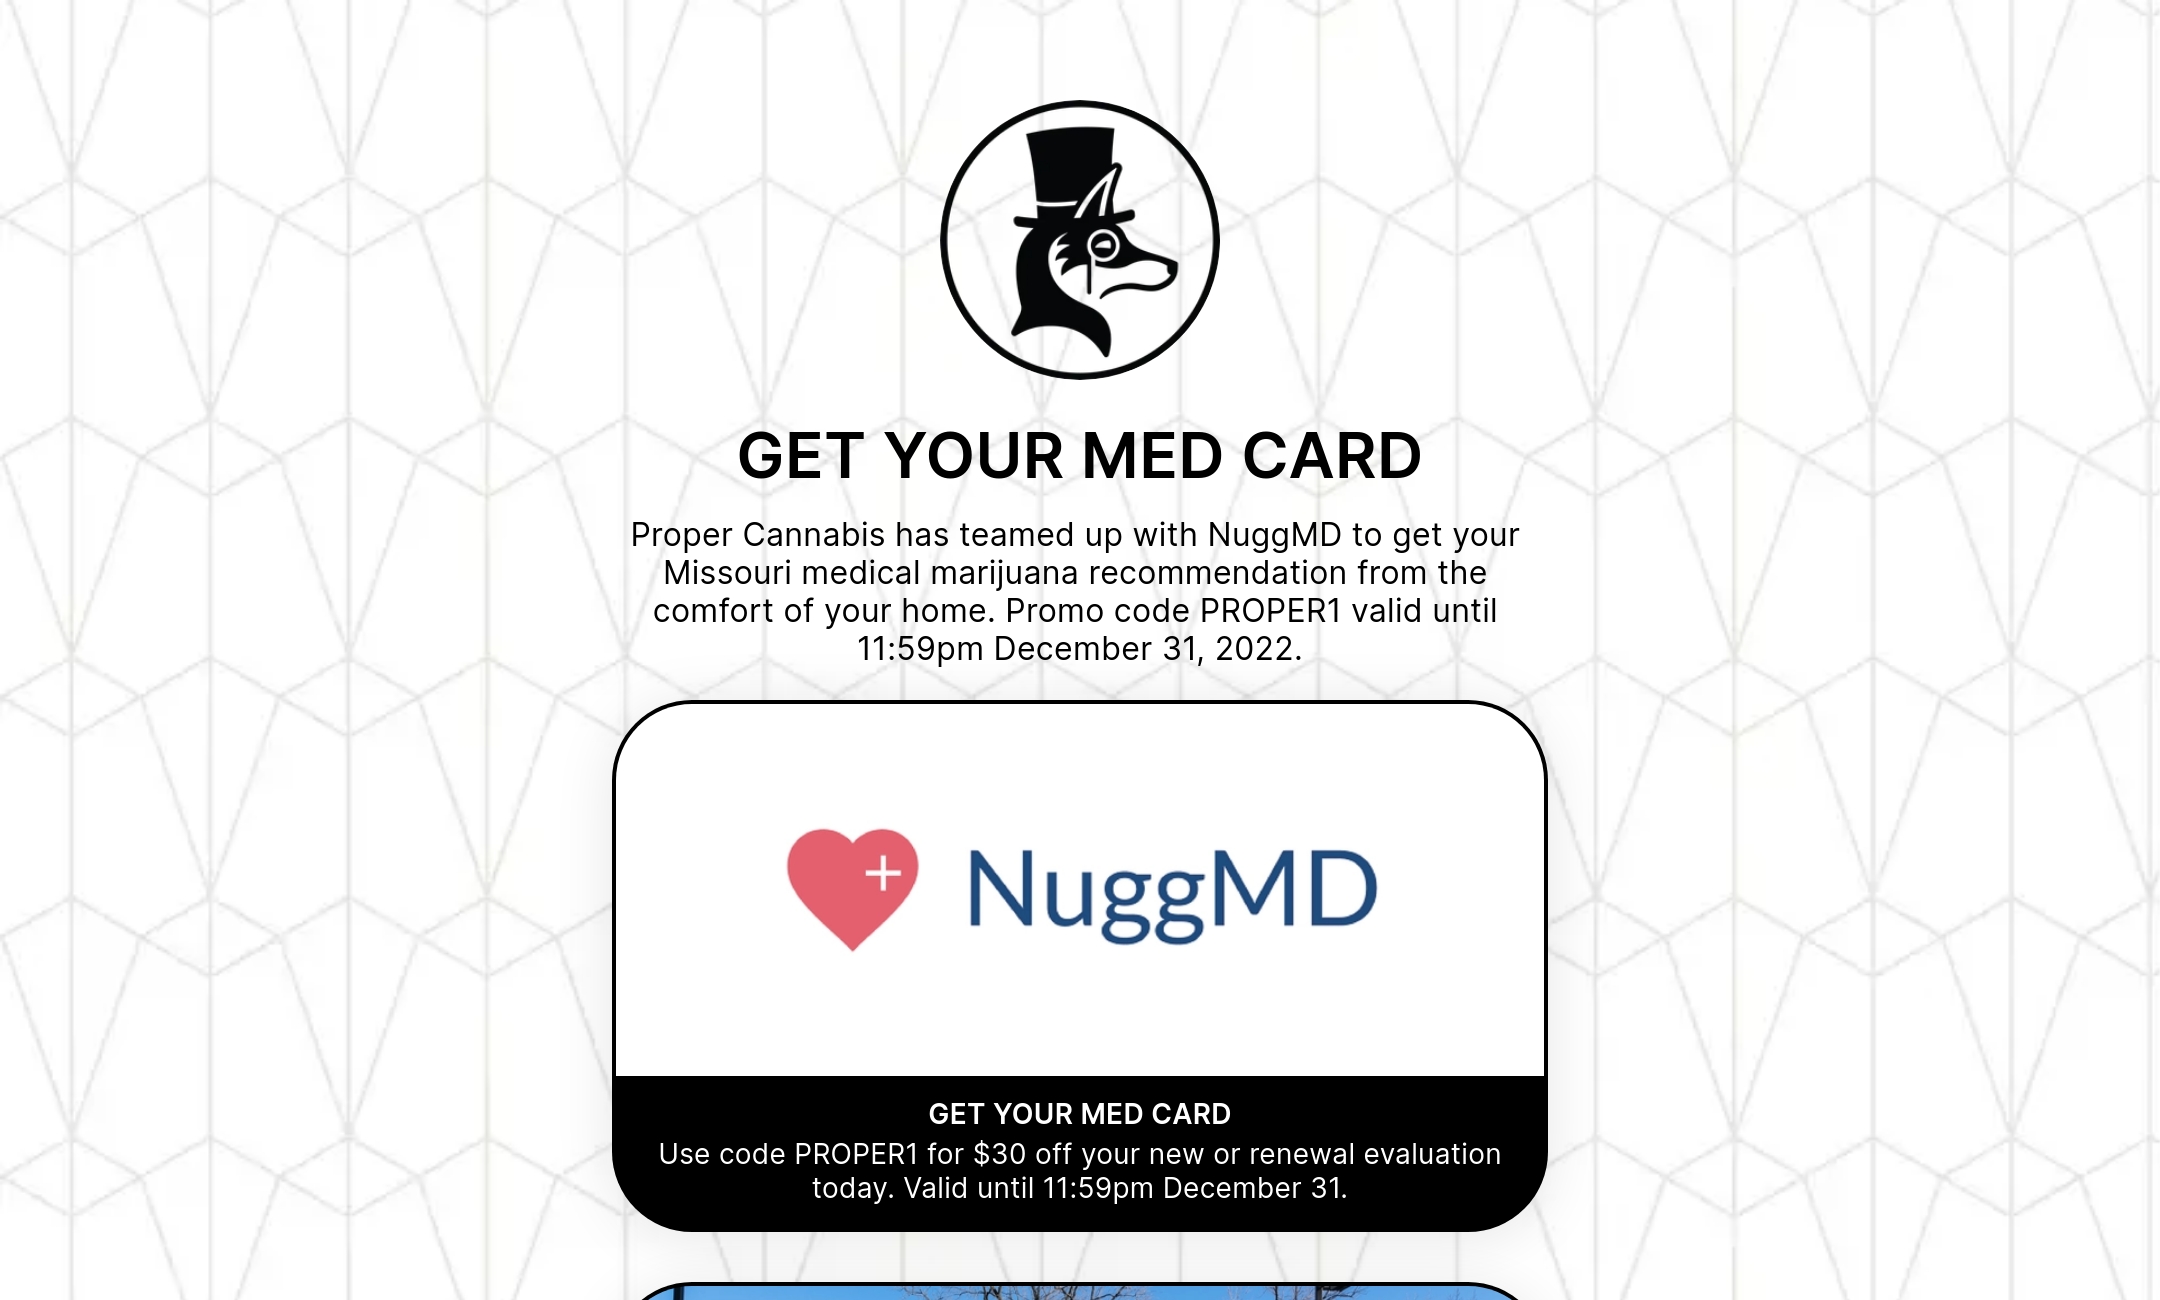 GET YOUR MED CARD's Flowpage